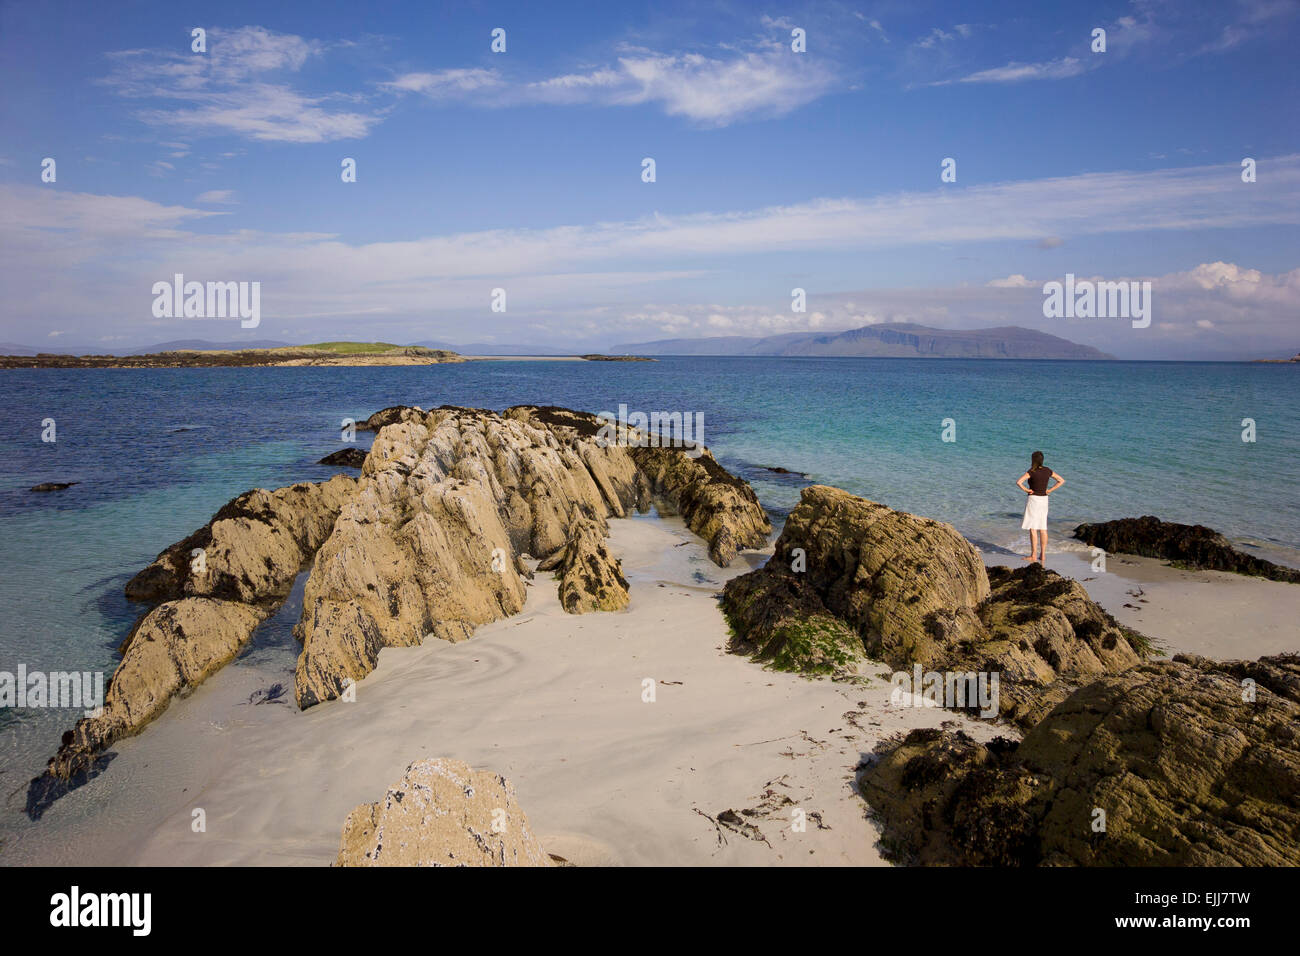 iona beach and young woman gazing out to the blue sea Stock Photo